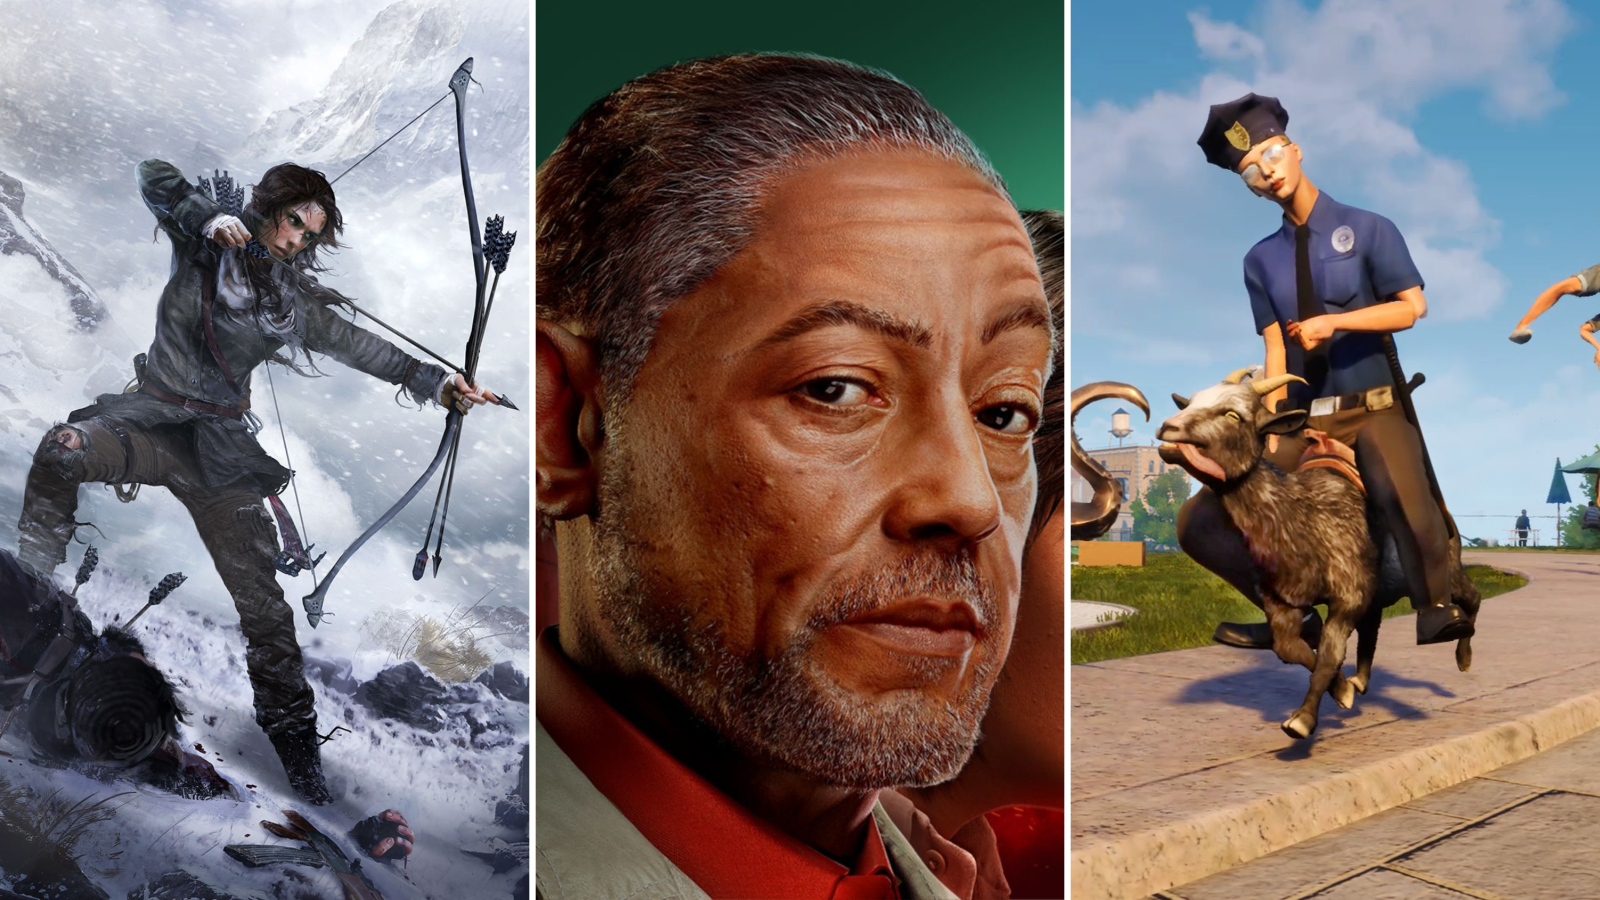 Xbox Game Pass December 2023: Far Cry 6, Remnant I and II, and